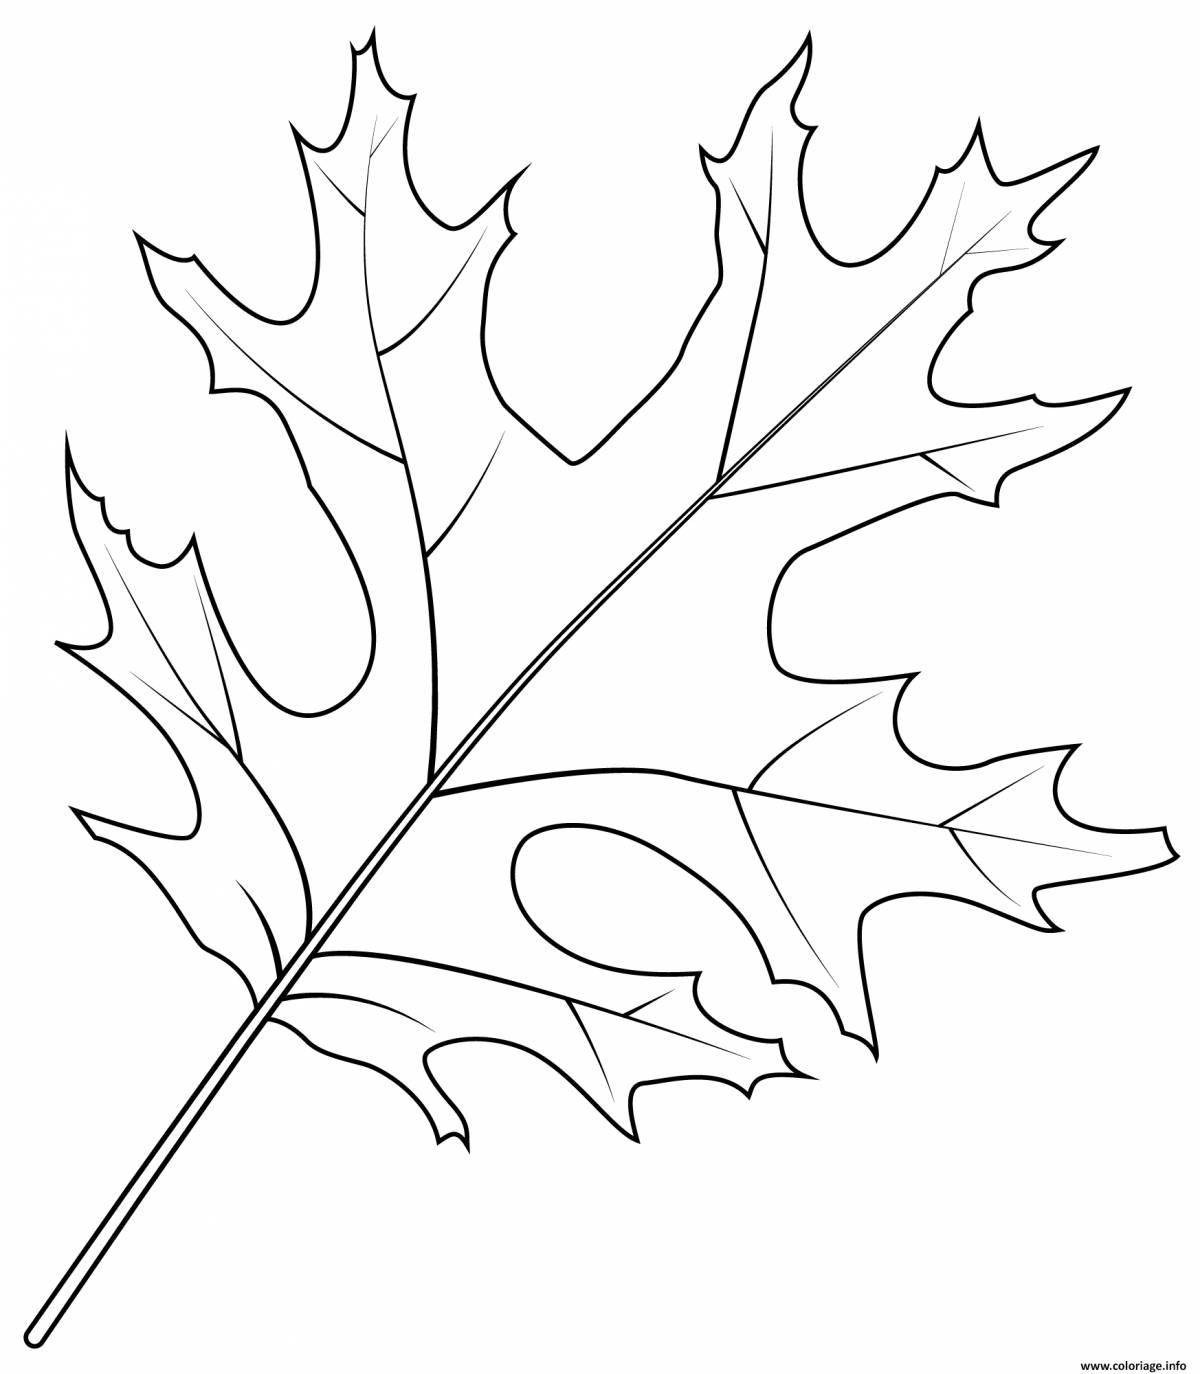 Abundant coloring leaves on a branch